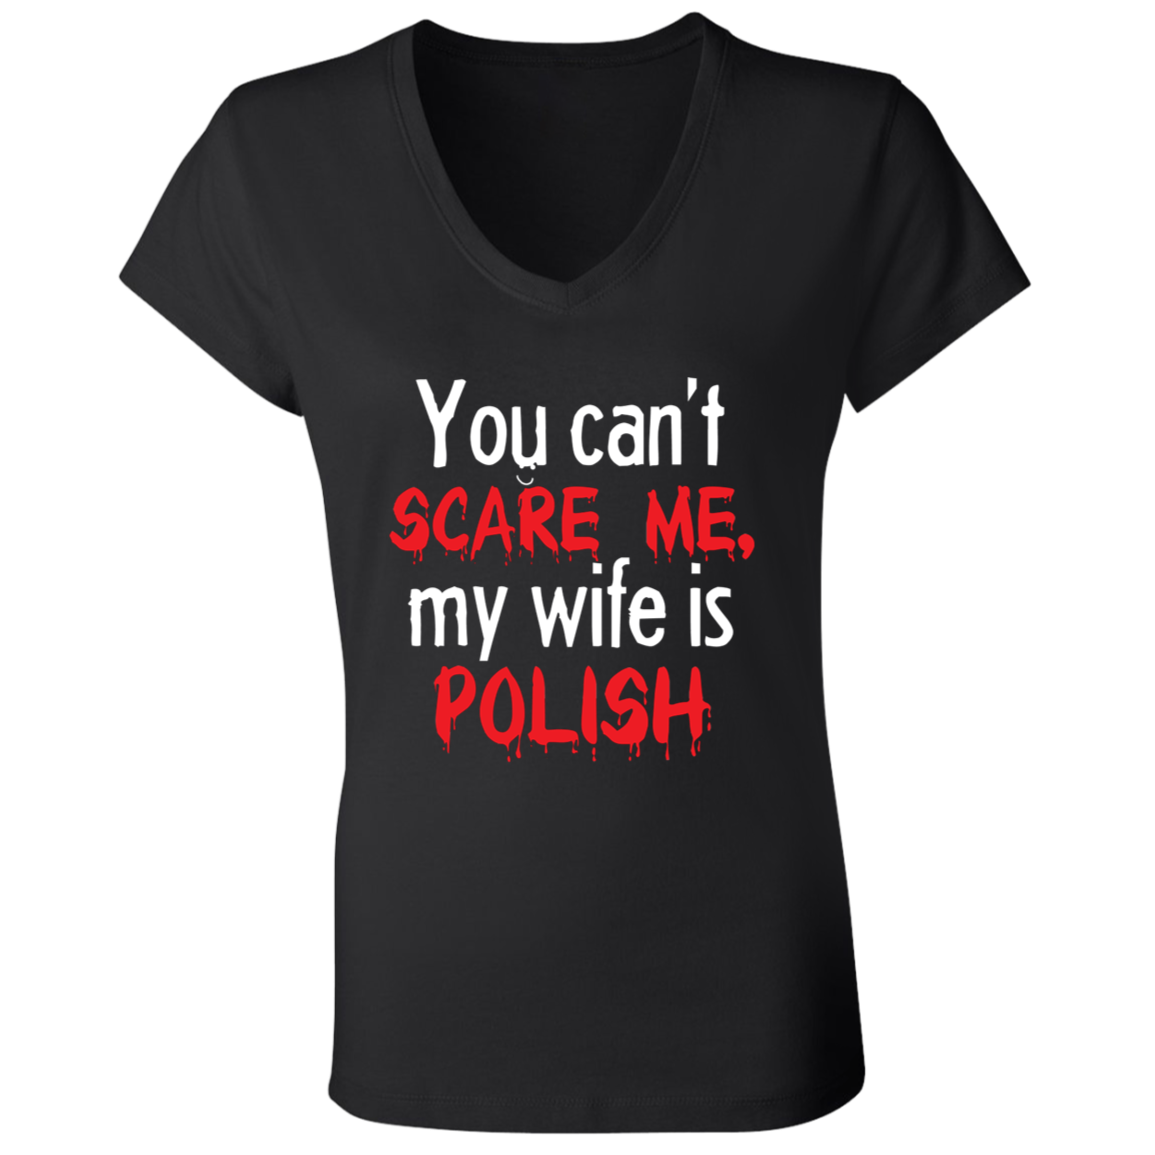 You Can't Scare Me My Wife Is Polish Apparel CustomCat B6005 Ladies' Jersey V-Neck T-Shirt Black S